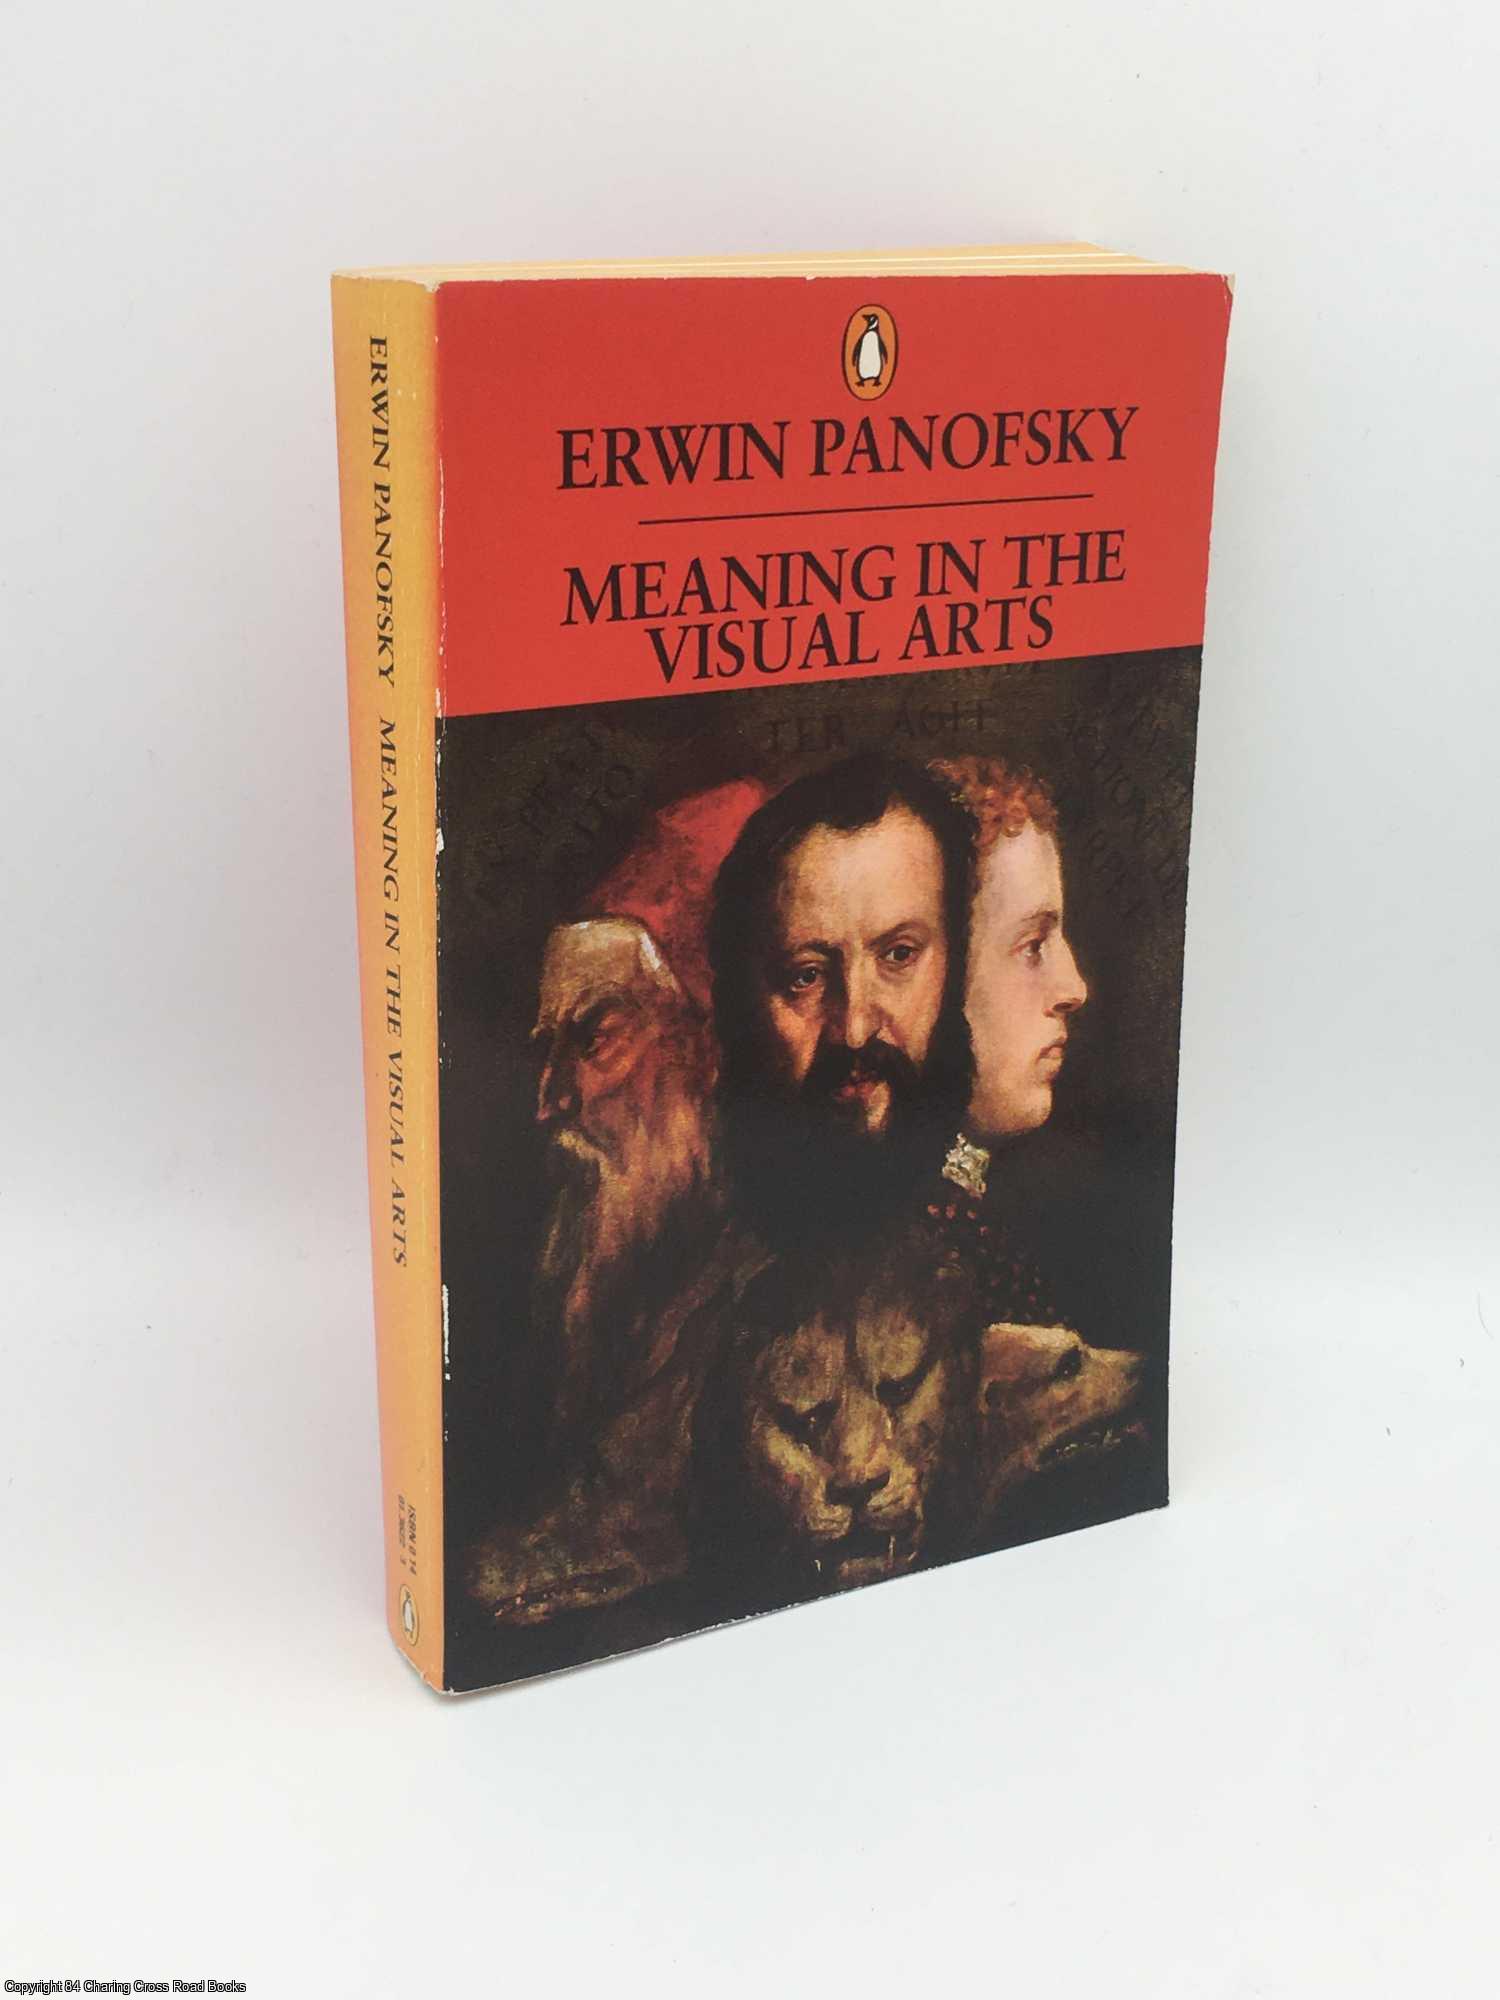 Panofsky, Erwin - Meaning in the Visual Arts